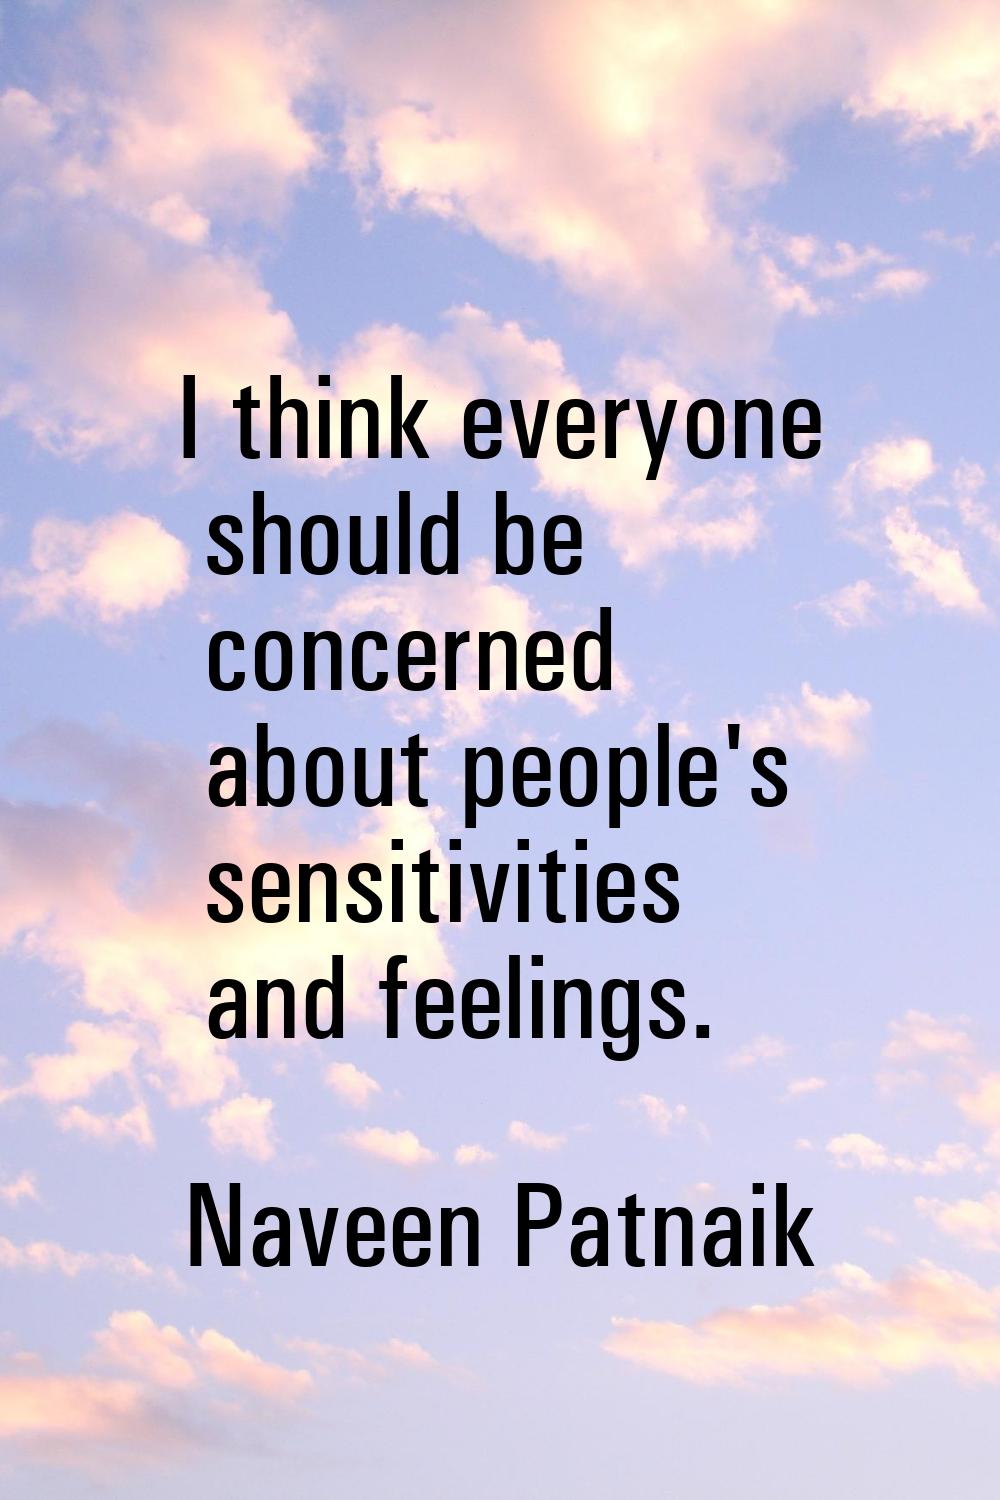 I think everyone should be concerned about people's sensitivities and feelings.